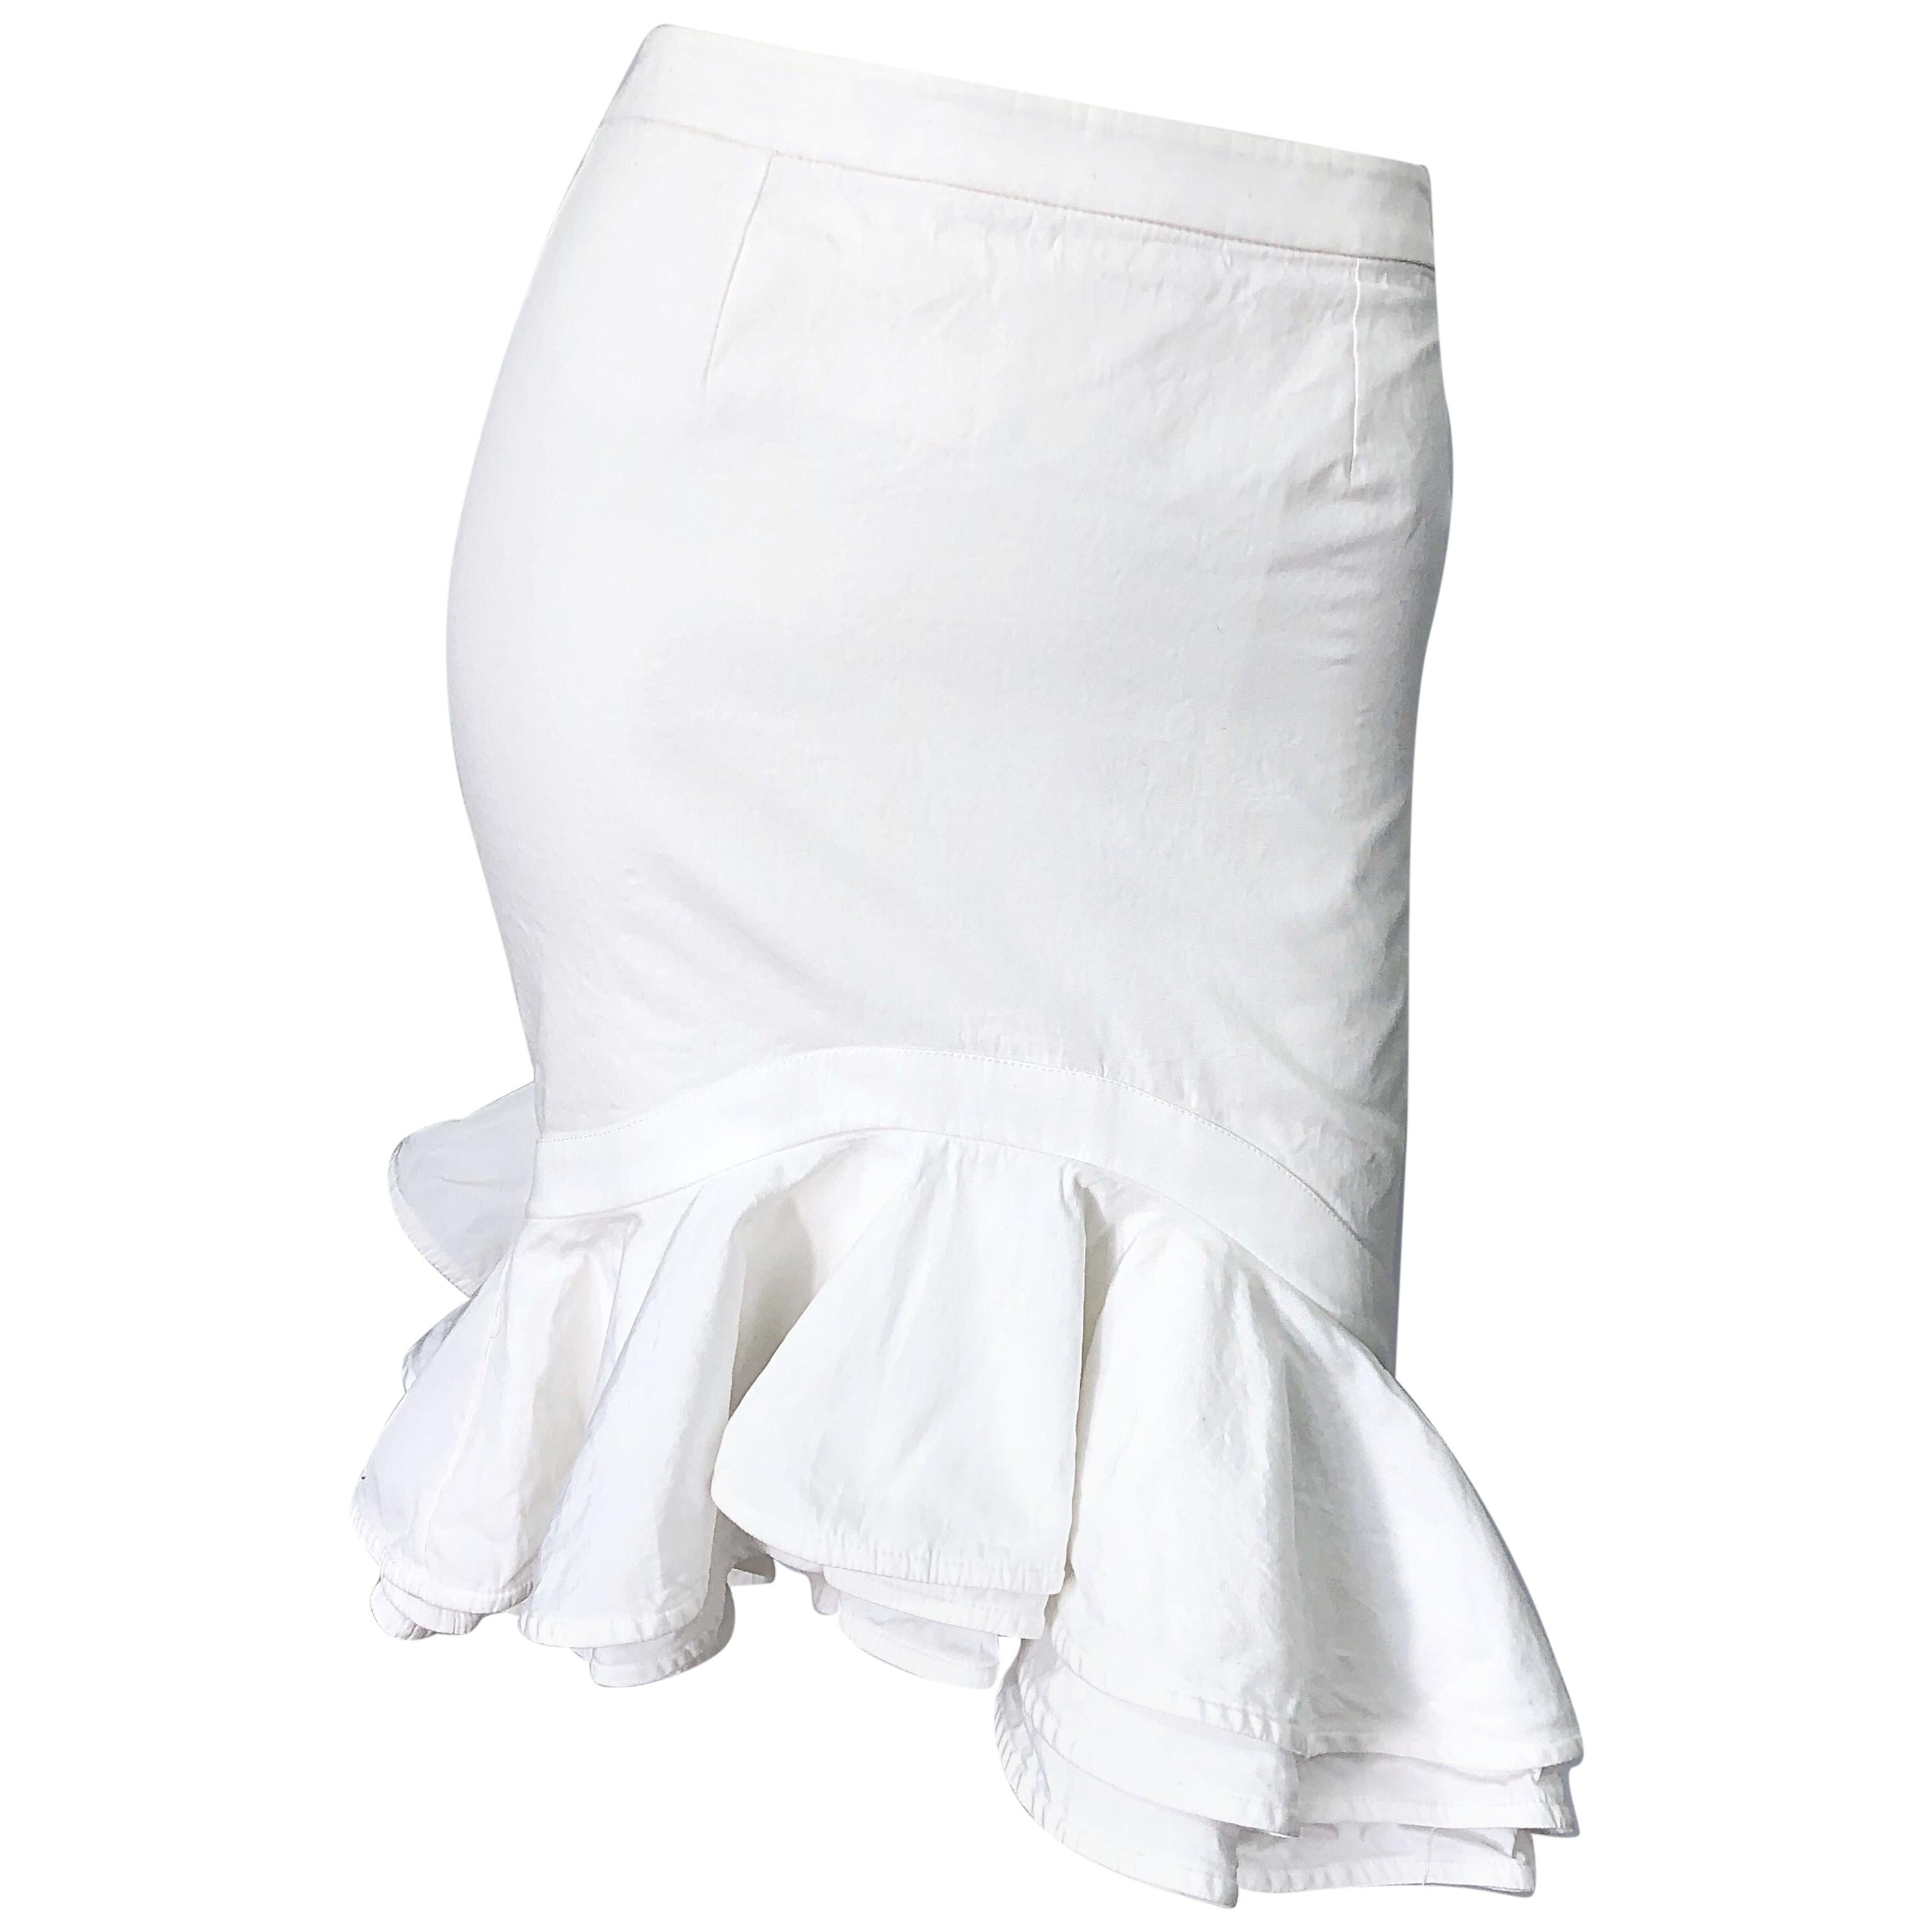 Rare early 2000s TOM FORD for YVES SAINT LAURENT Rive Gauche stark white cotton vintage flamenco style skirt ! Features an asymmetrical hem with multiple layers of ruffles. Hidden zipper up the back with hook-and-eye closure. The pictured 1990s